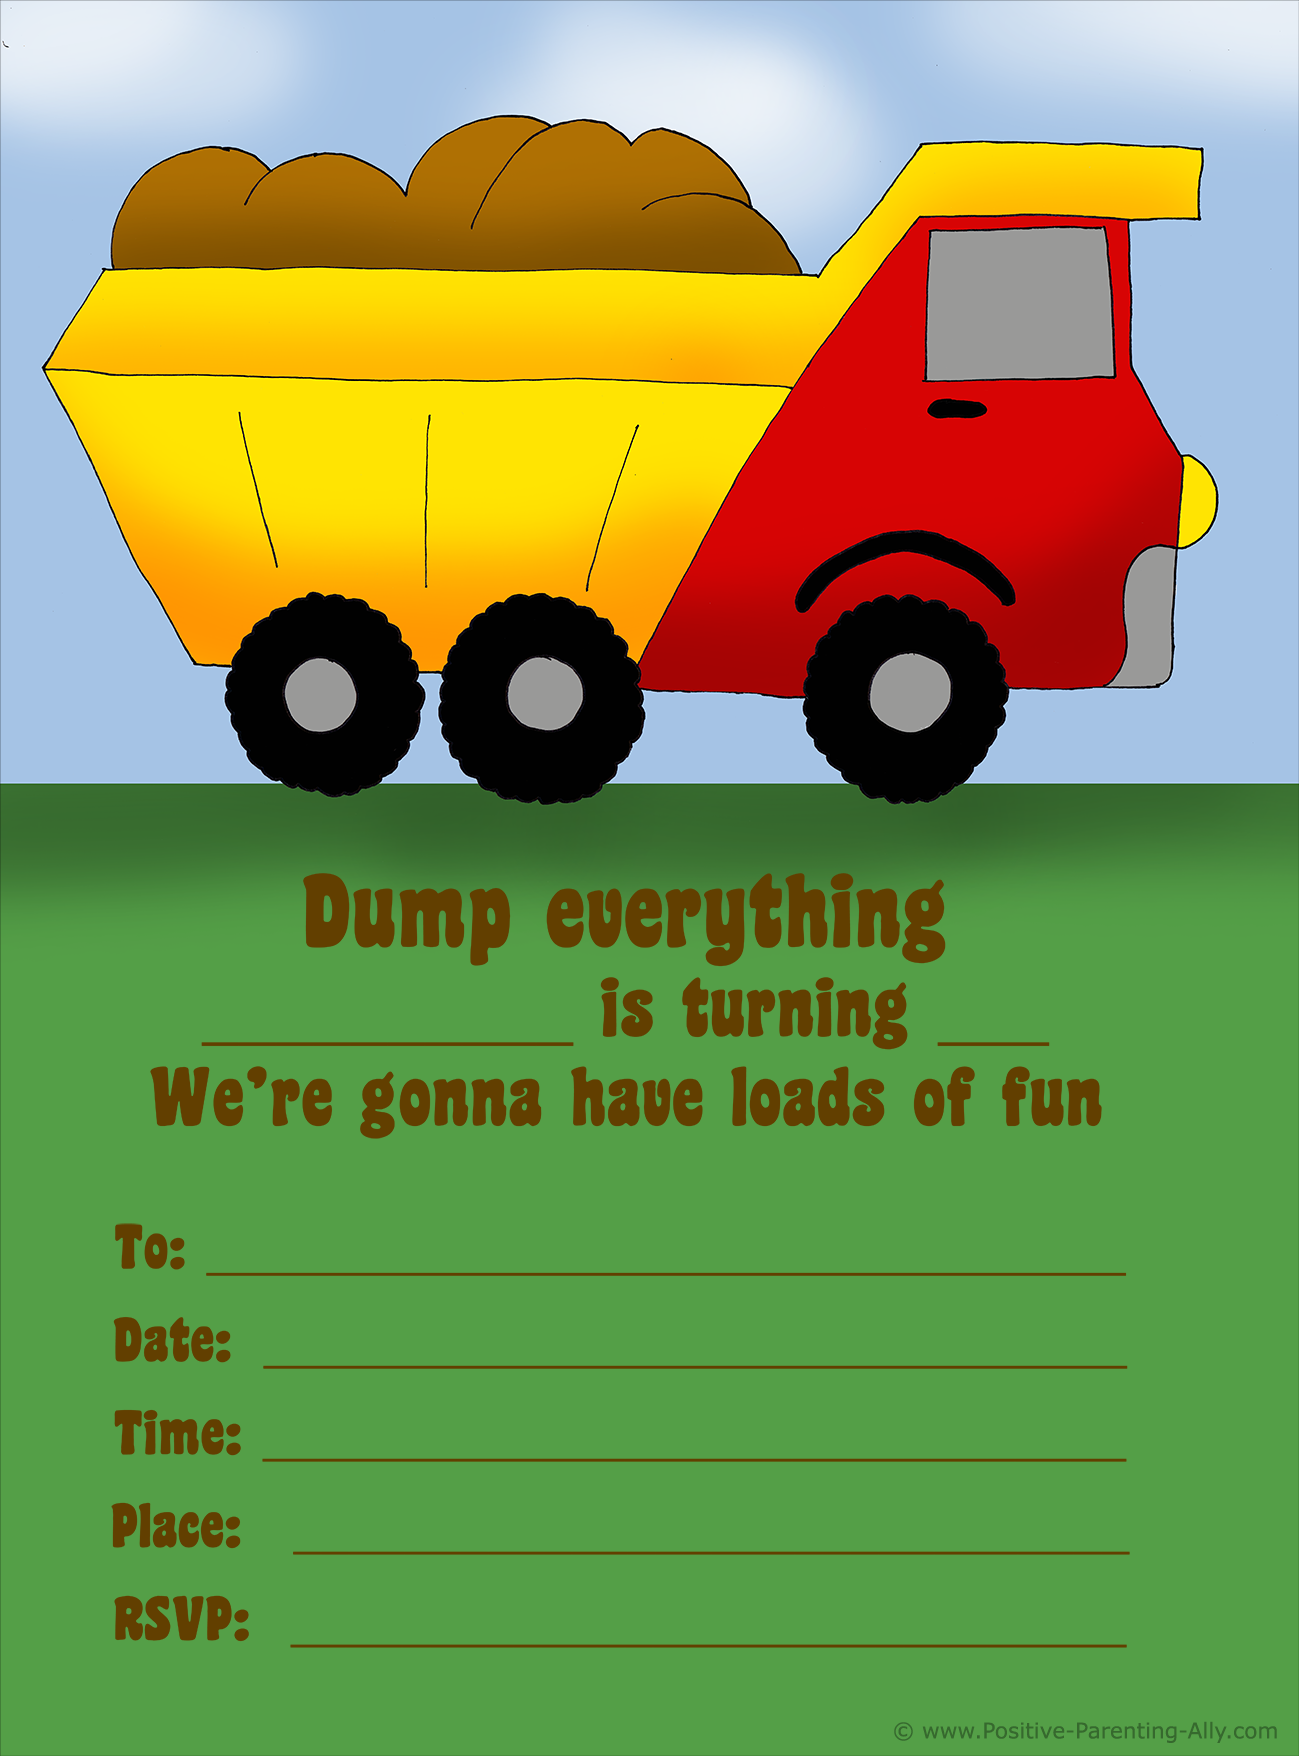 Printable birthday invitation with a truck for boys.